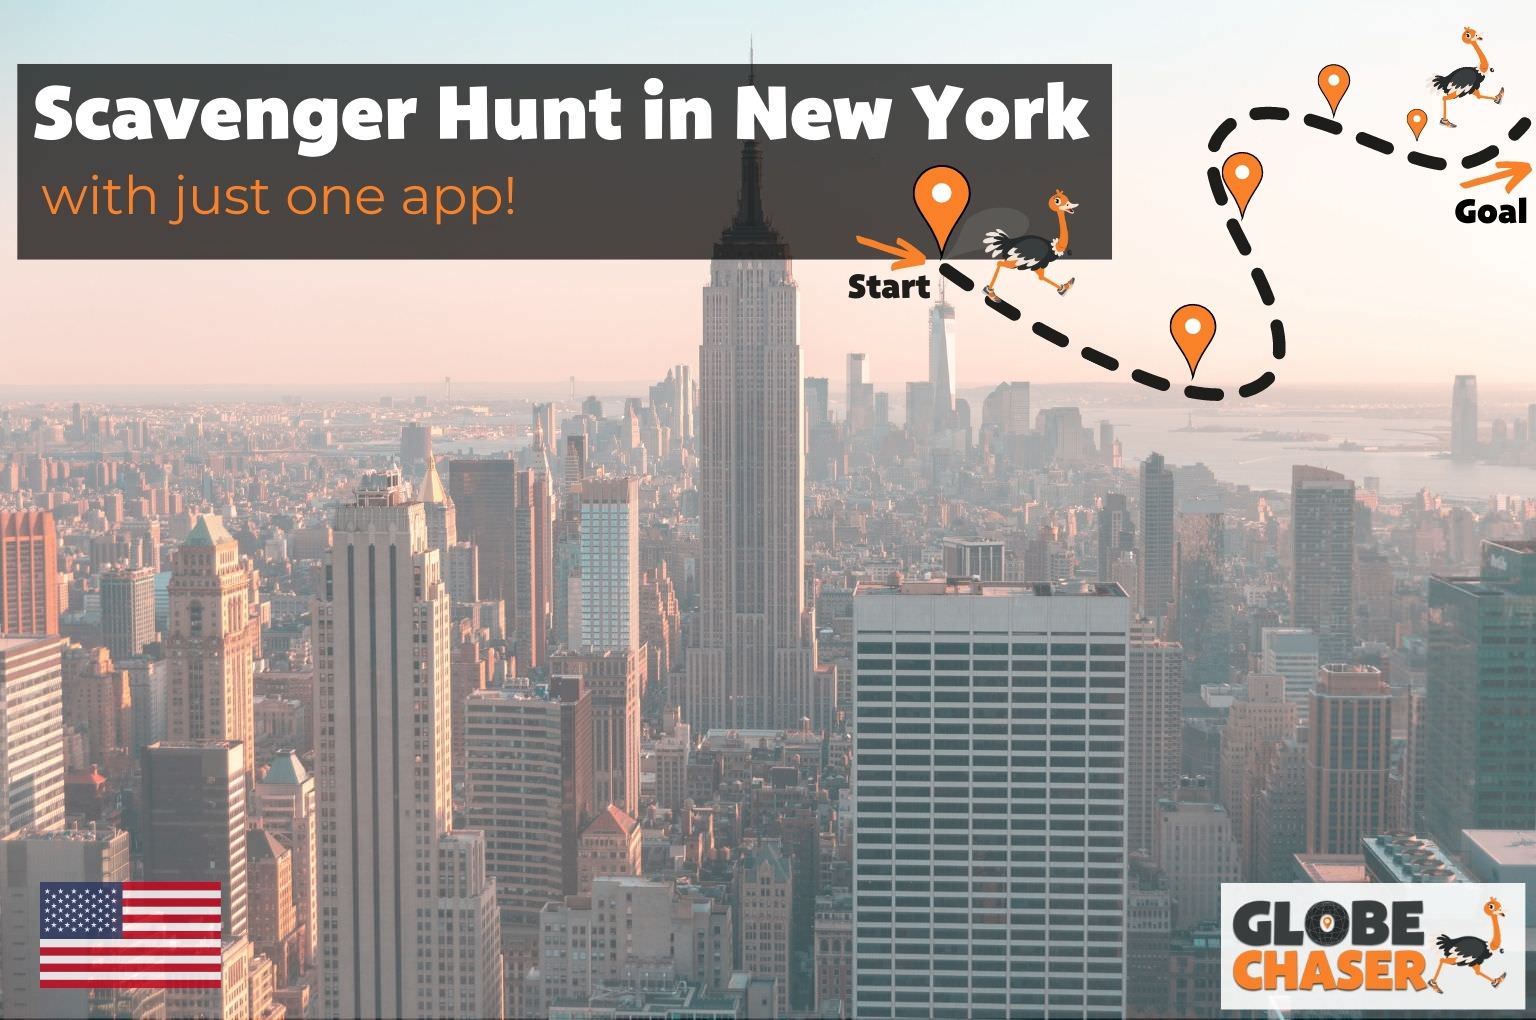 Scavenger Hunt in New York, USA - Family Activities with the Globe Chaser App for Outdoor Fun